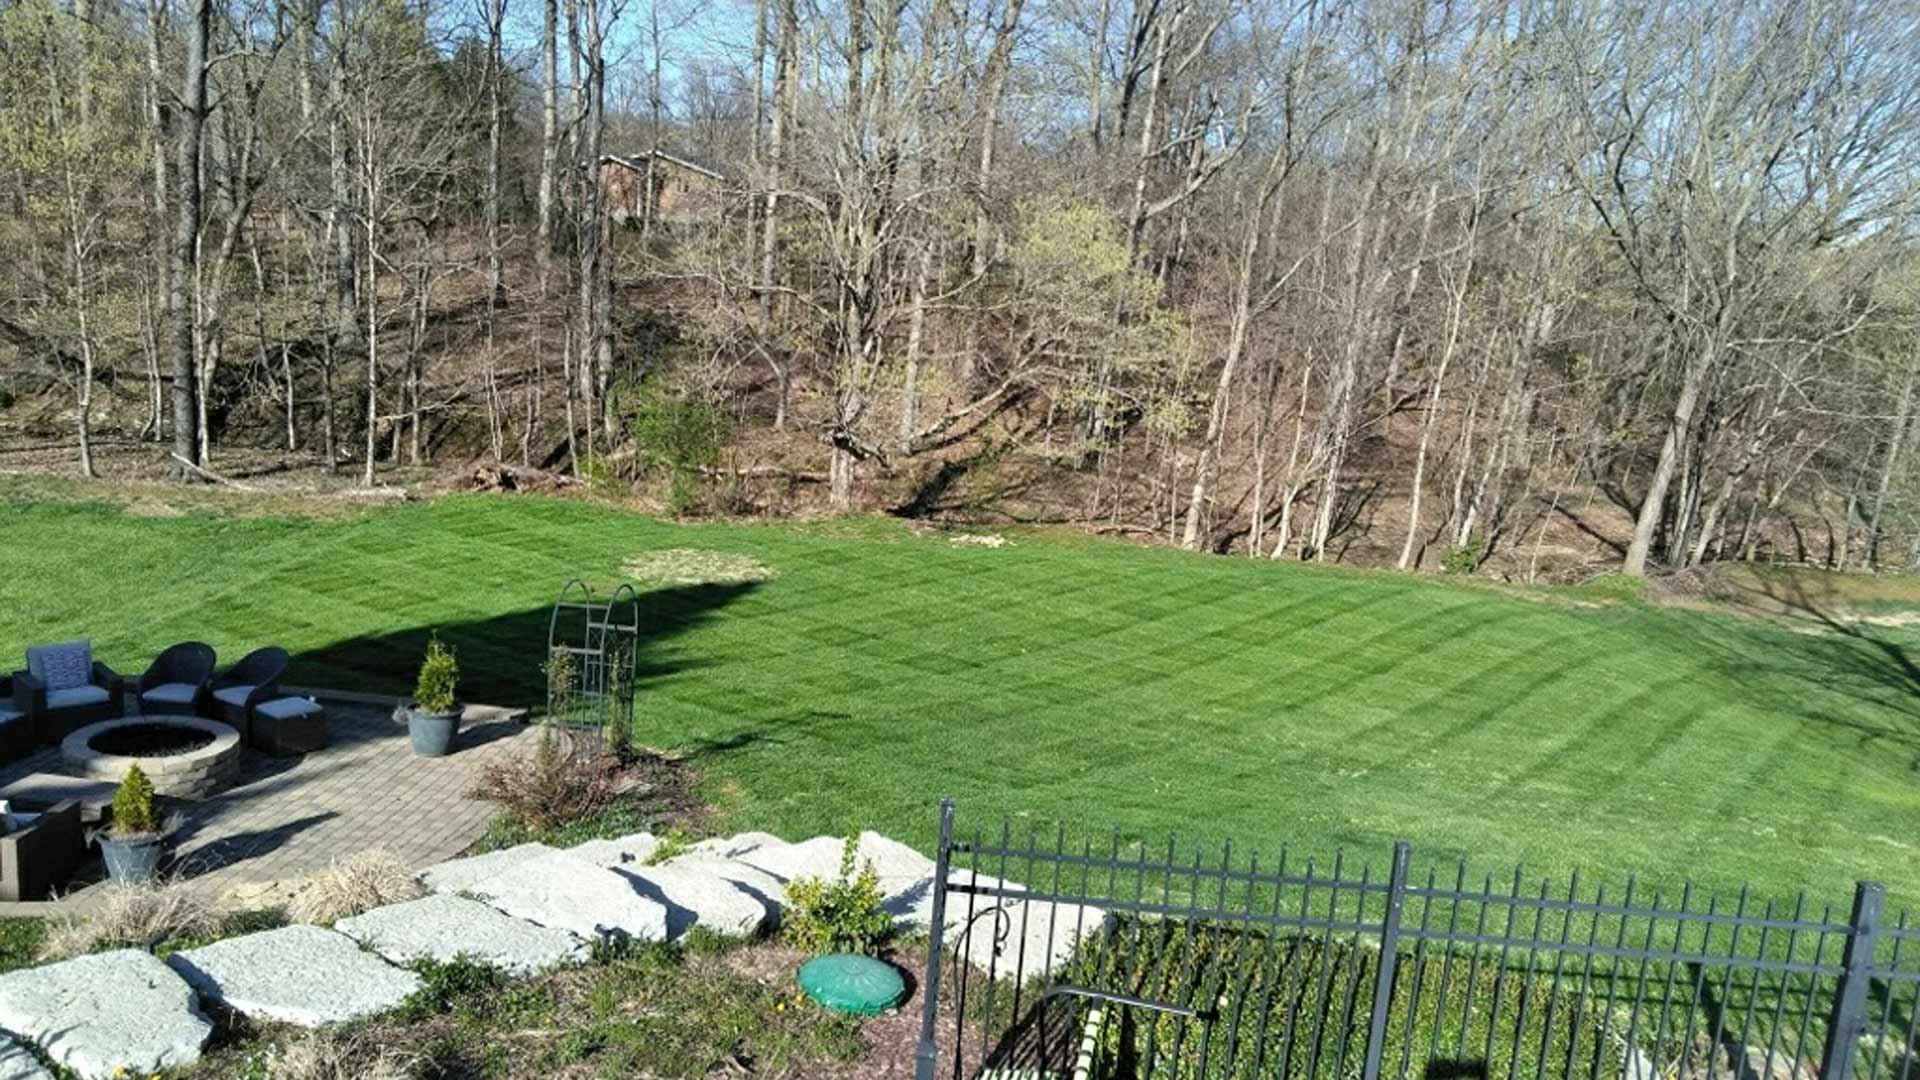 Mower patterns in a large backyard in Worthington, KY.